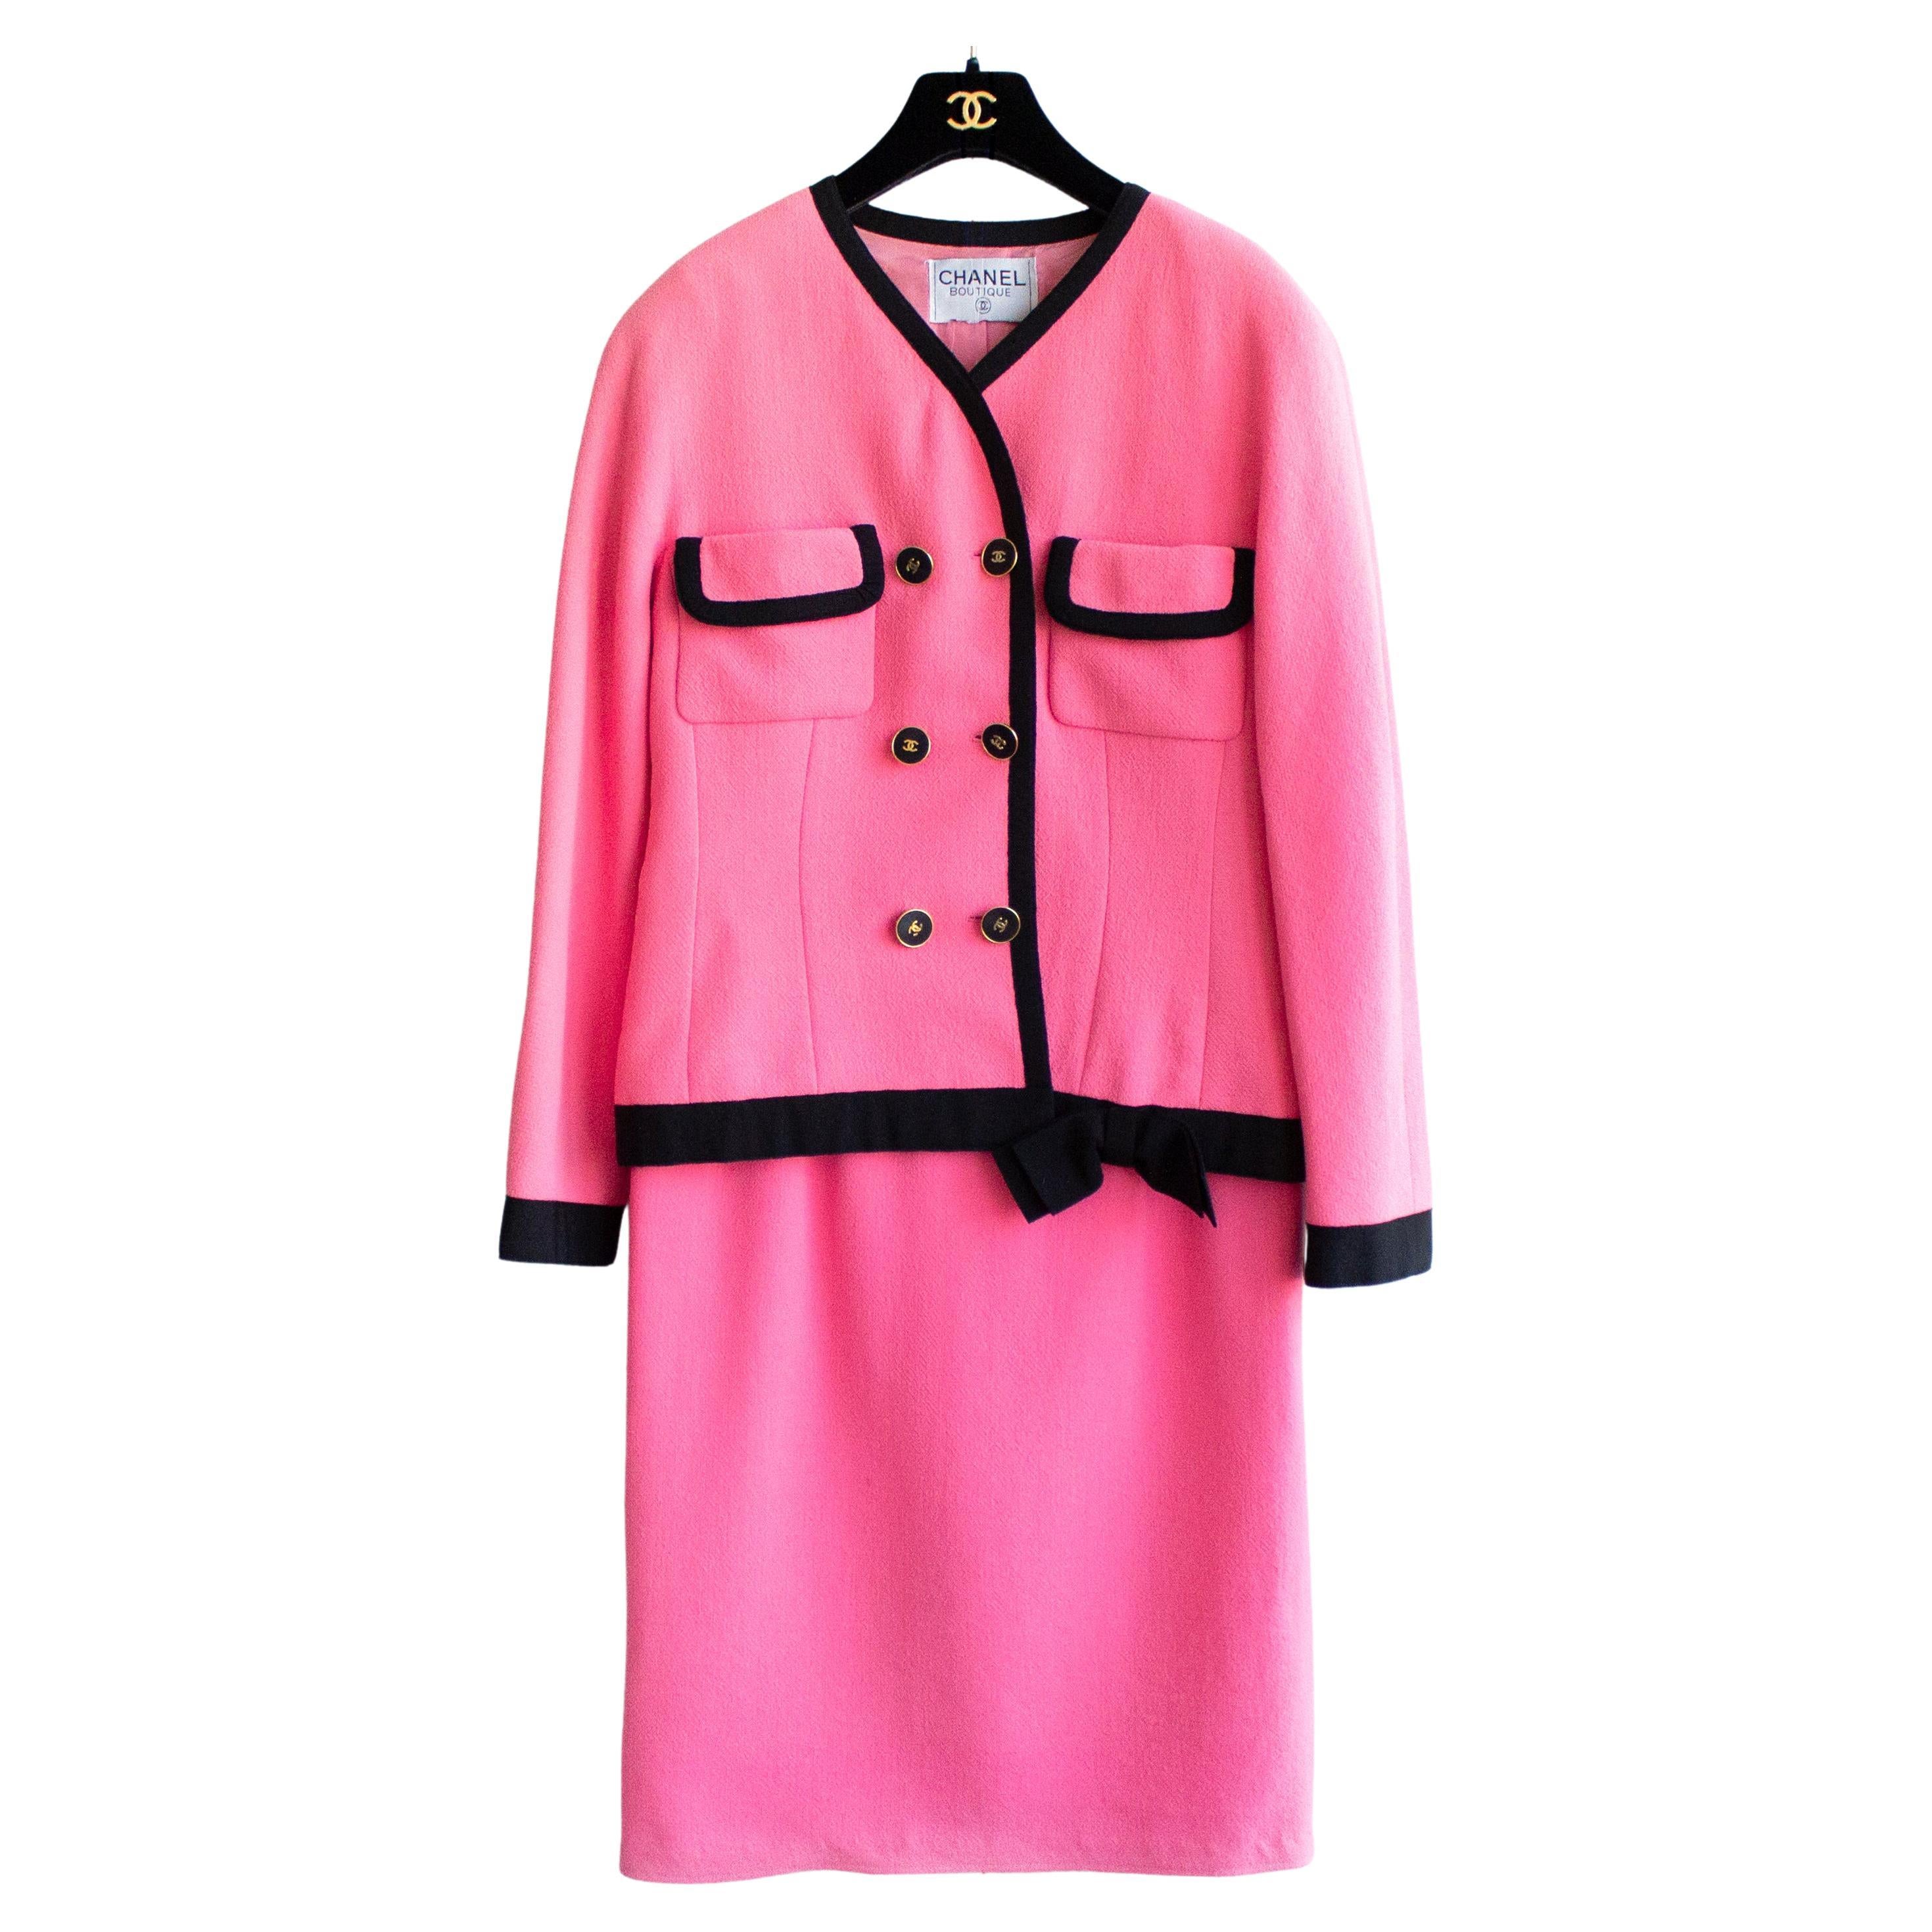 Chanel 1980s or early 1990s Fuschia Pink Wool Skirt Jacket Suit